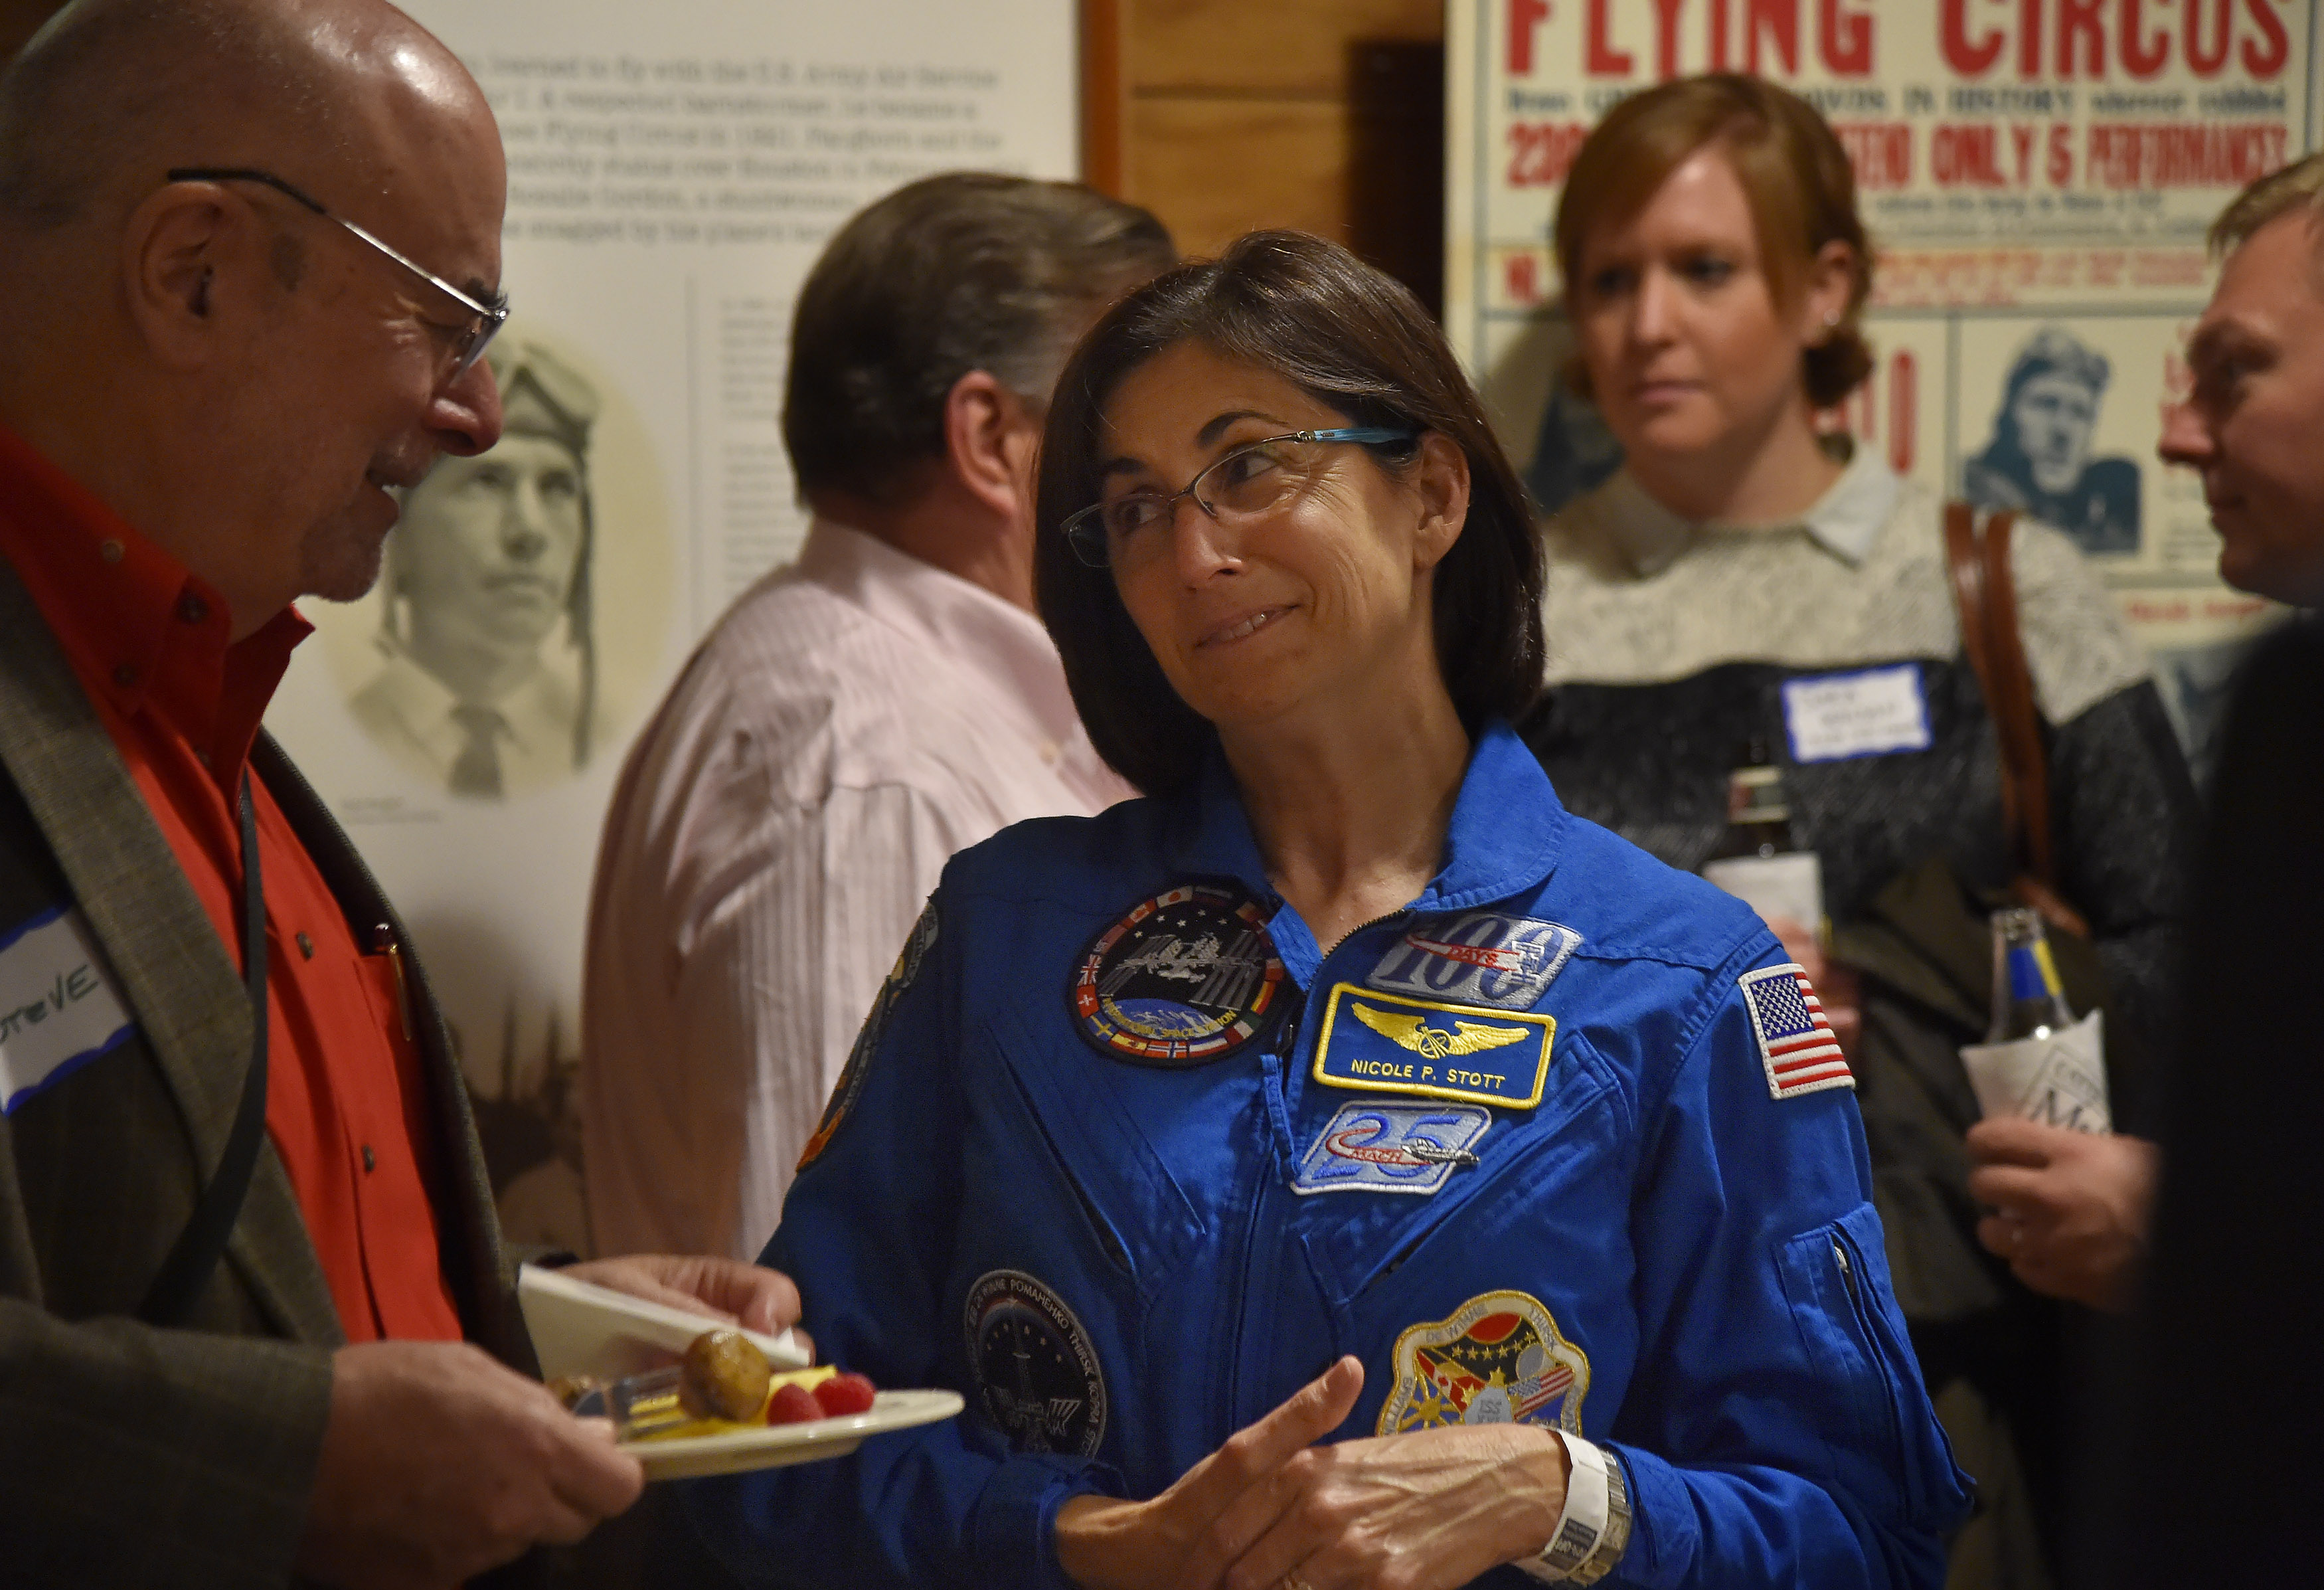 Retired NASA astronaut Nicole Stott chats with AOPA High School Symposium participants at a welcome reception in Seattle, Nov. 6. Photo by David Tulis.